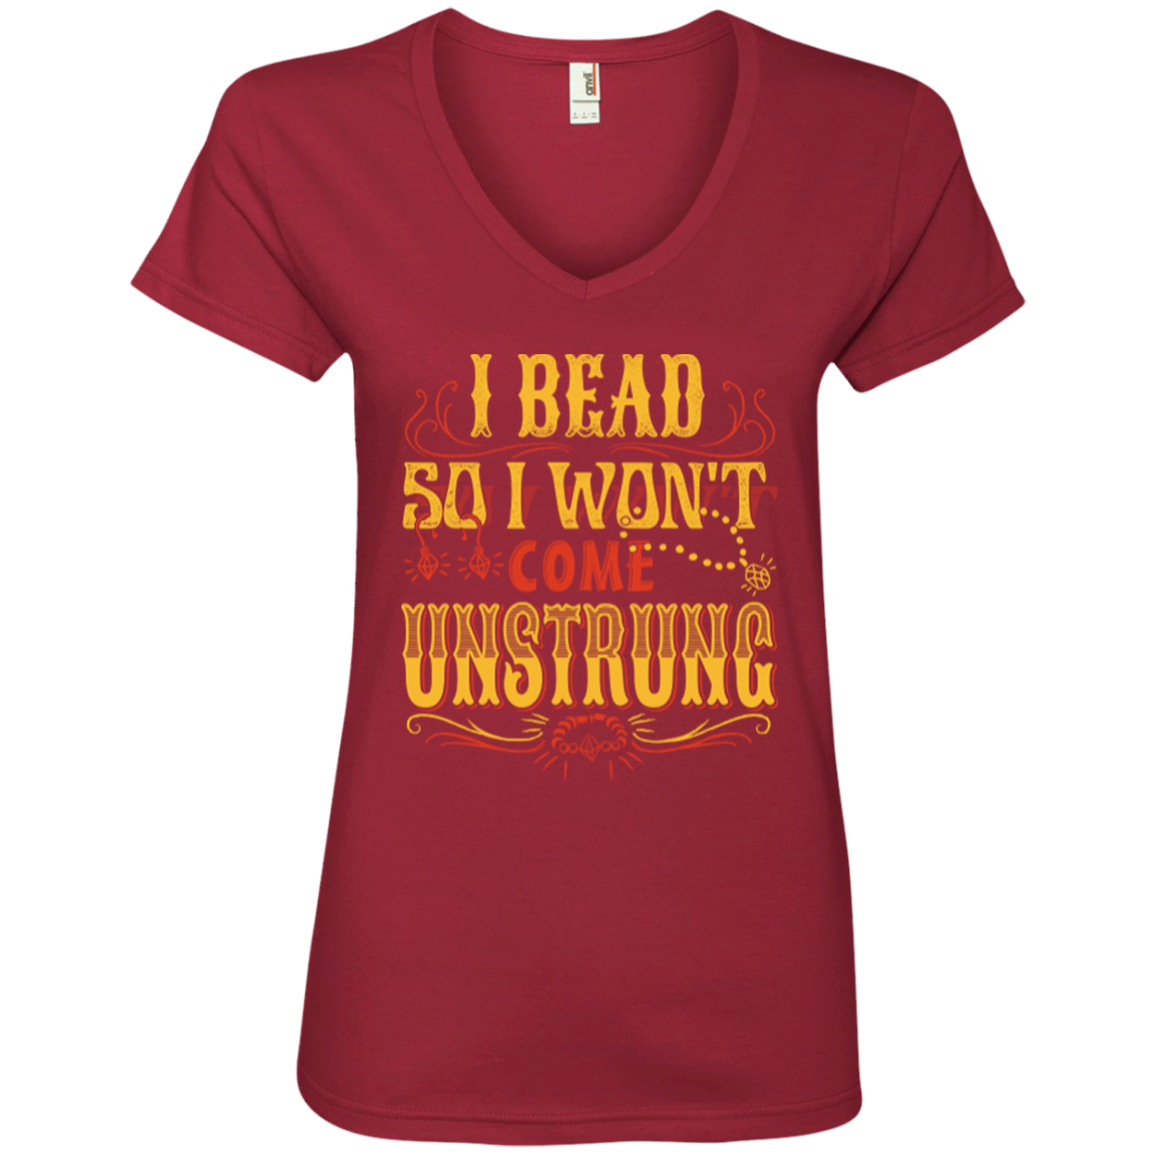 I Bead So I Won't Come Unstrung (gold) Ladies V-neck Tee - Crafter4Life - 4